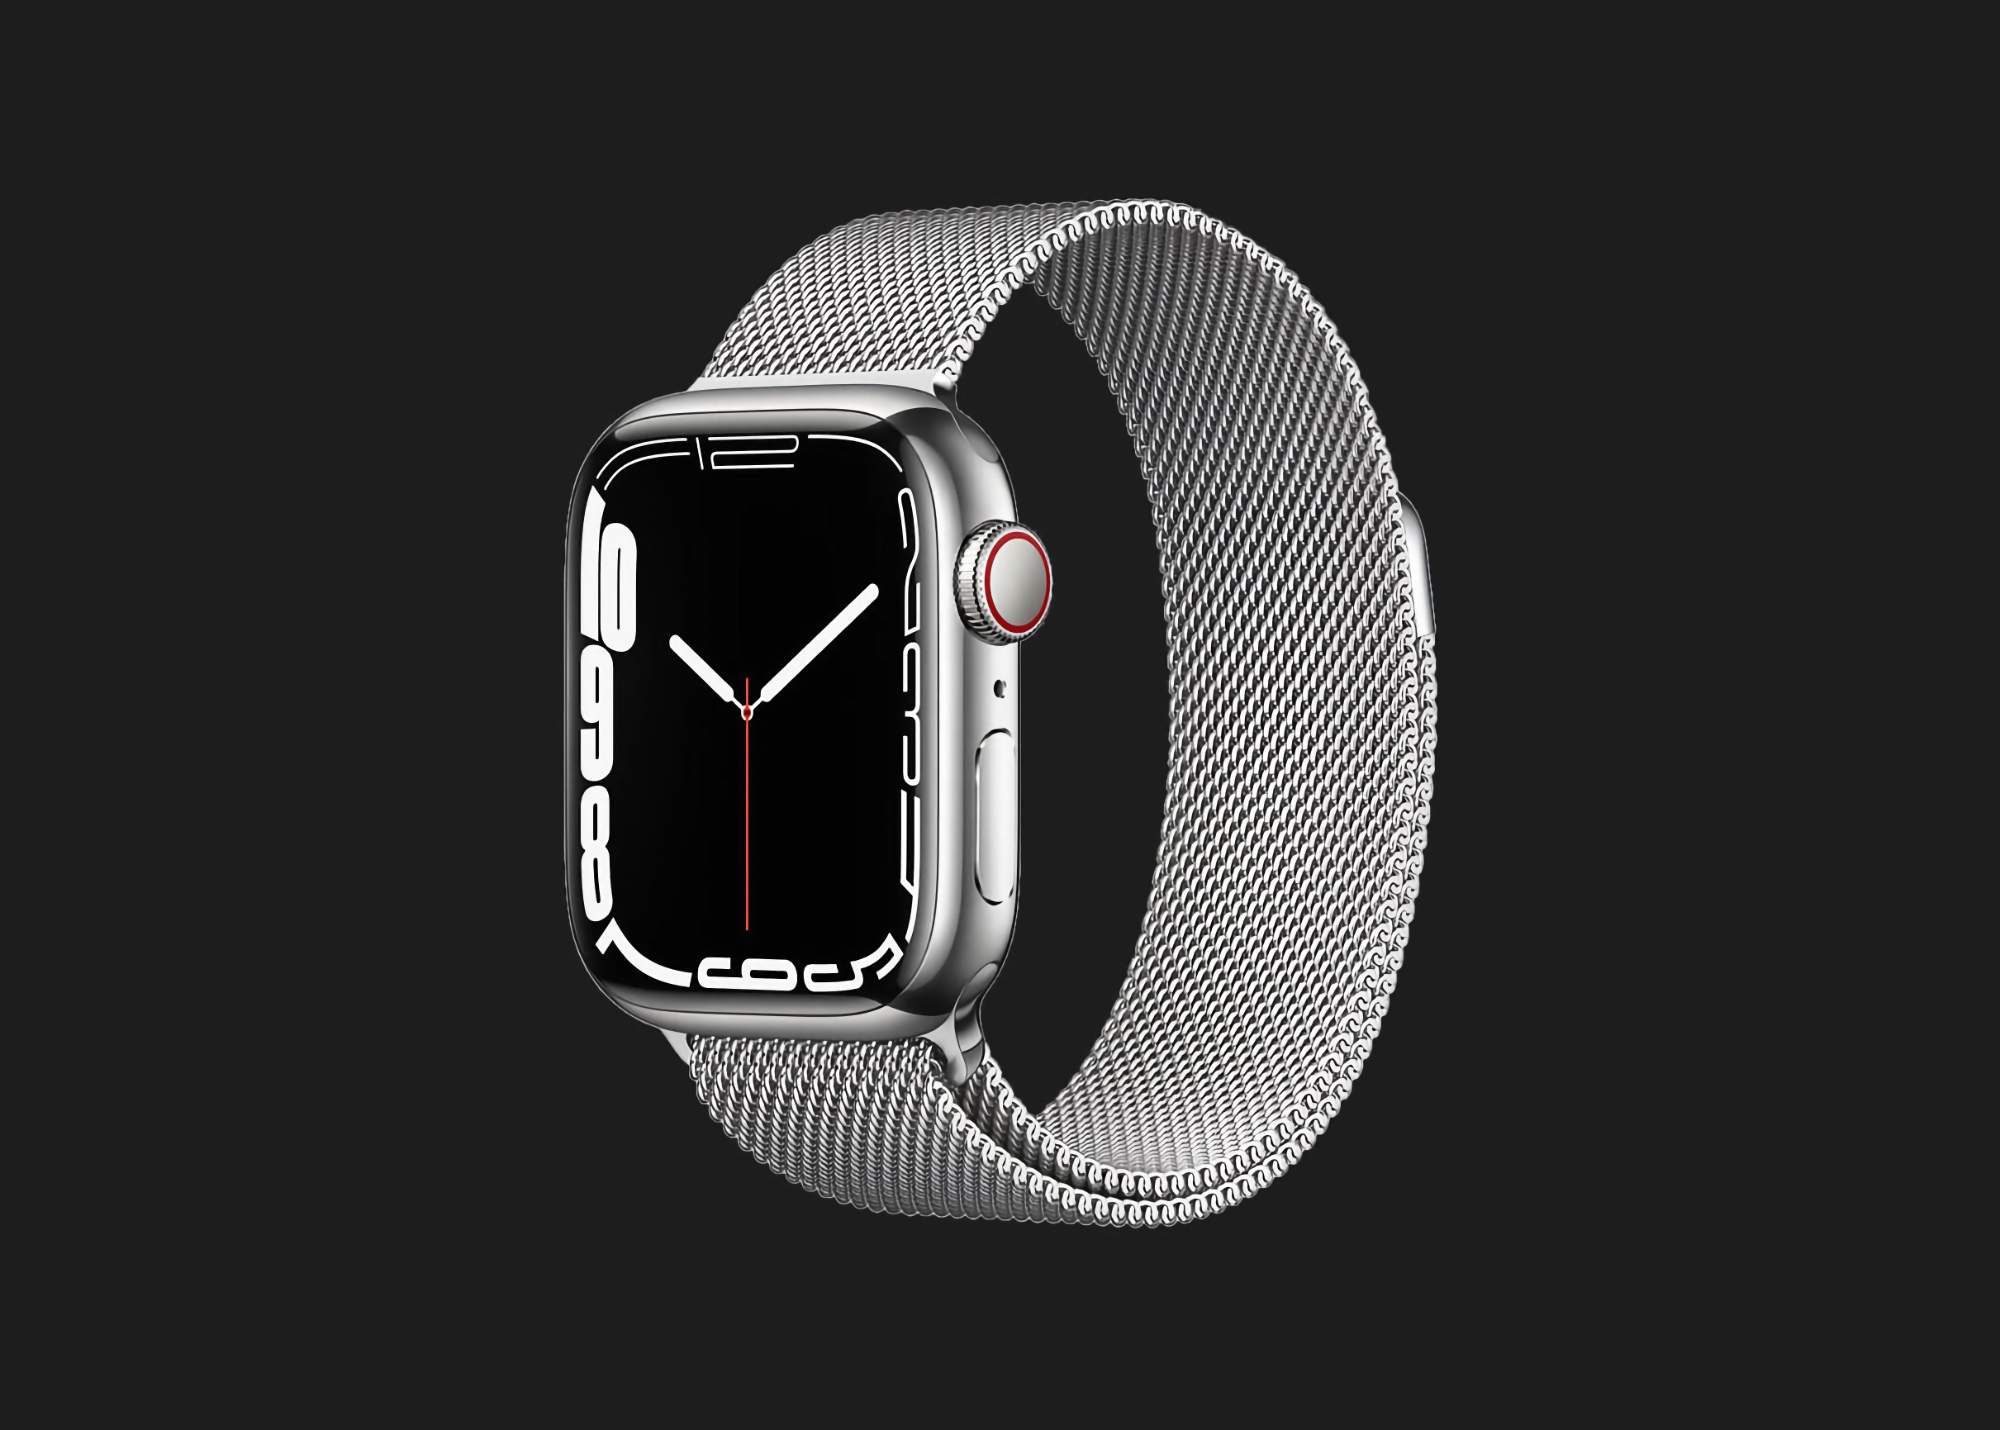 Limited time deal: Apple Watch Series 7 with mobile connectivity and stainless steel case available on Amazon at a discounted price of $78